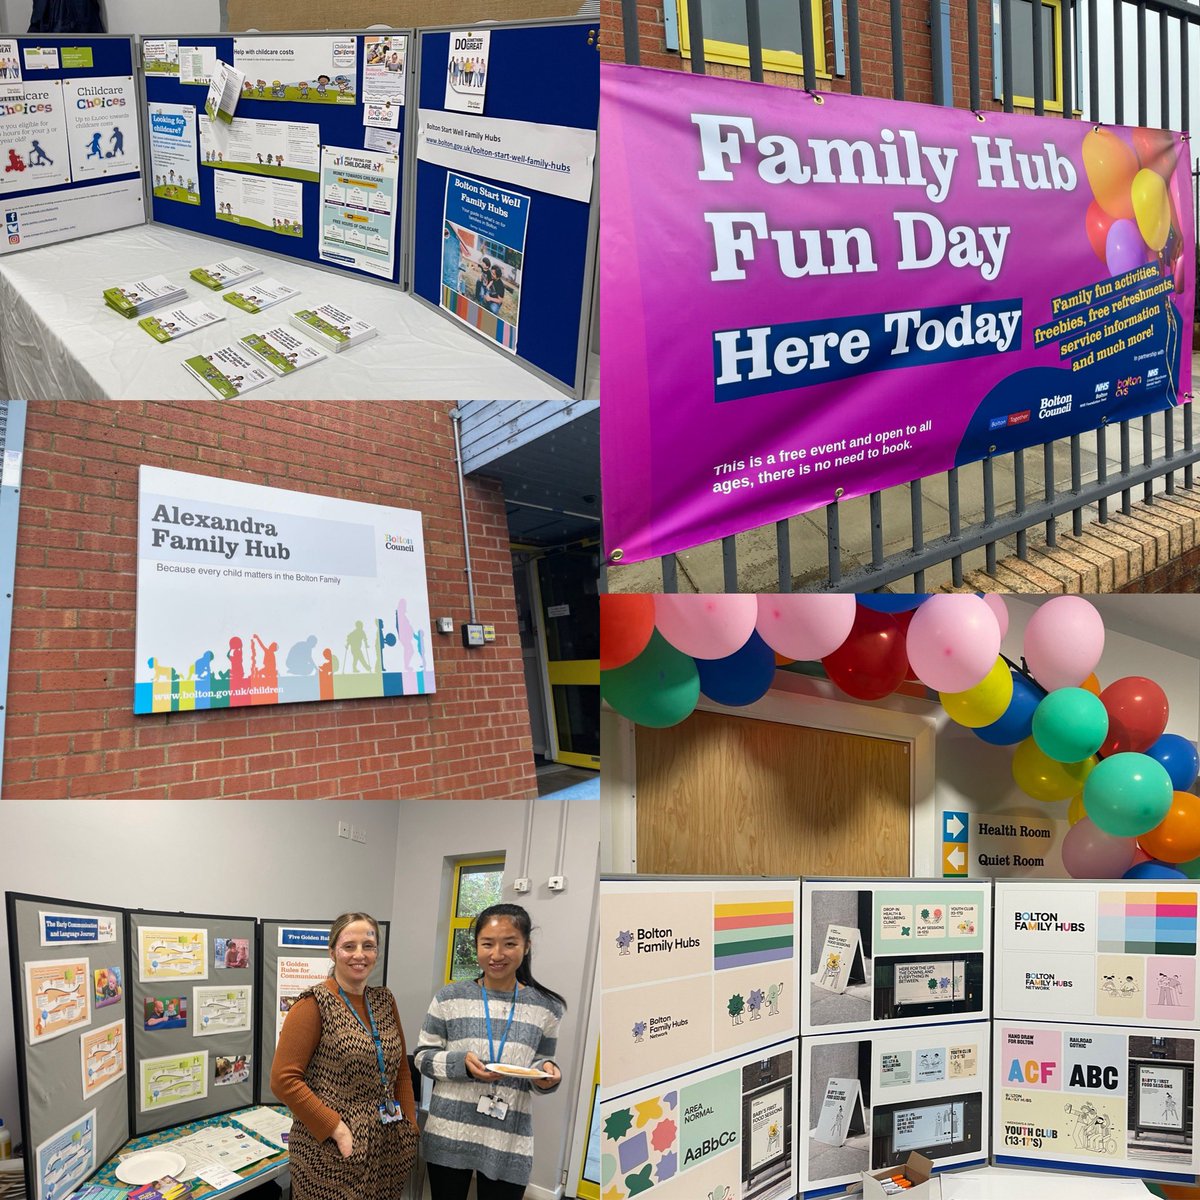 Another successful #FamilyHub launch event yesterday this time at Alexandra Family Hub, great to see partners coming together and families enjoying the day! Thanks to everyone involved!